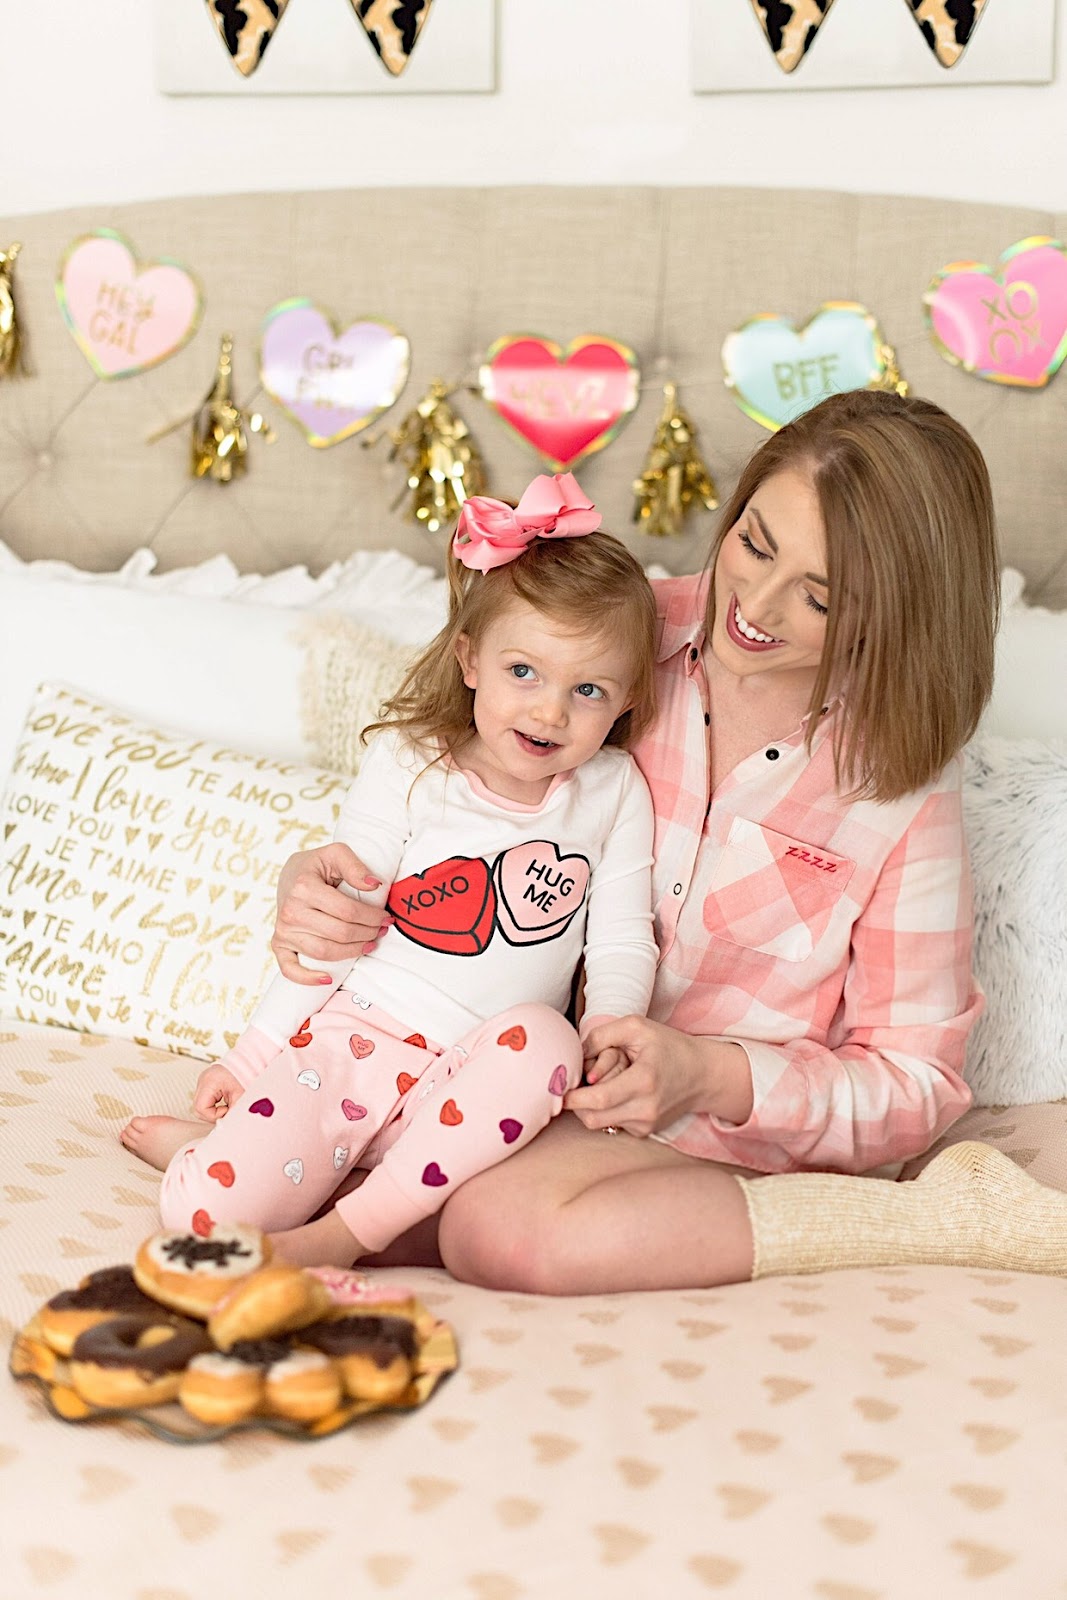 Mommy and Me Valentine Pajamas - Click through to see more on Something Delightful Blog